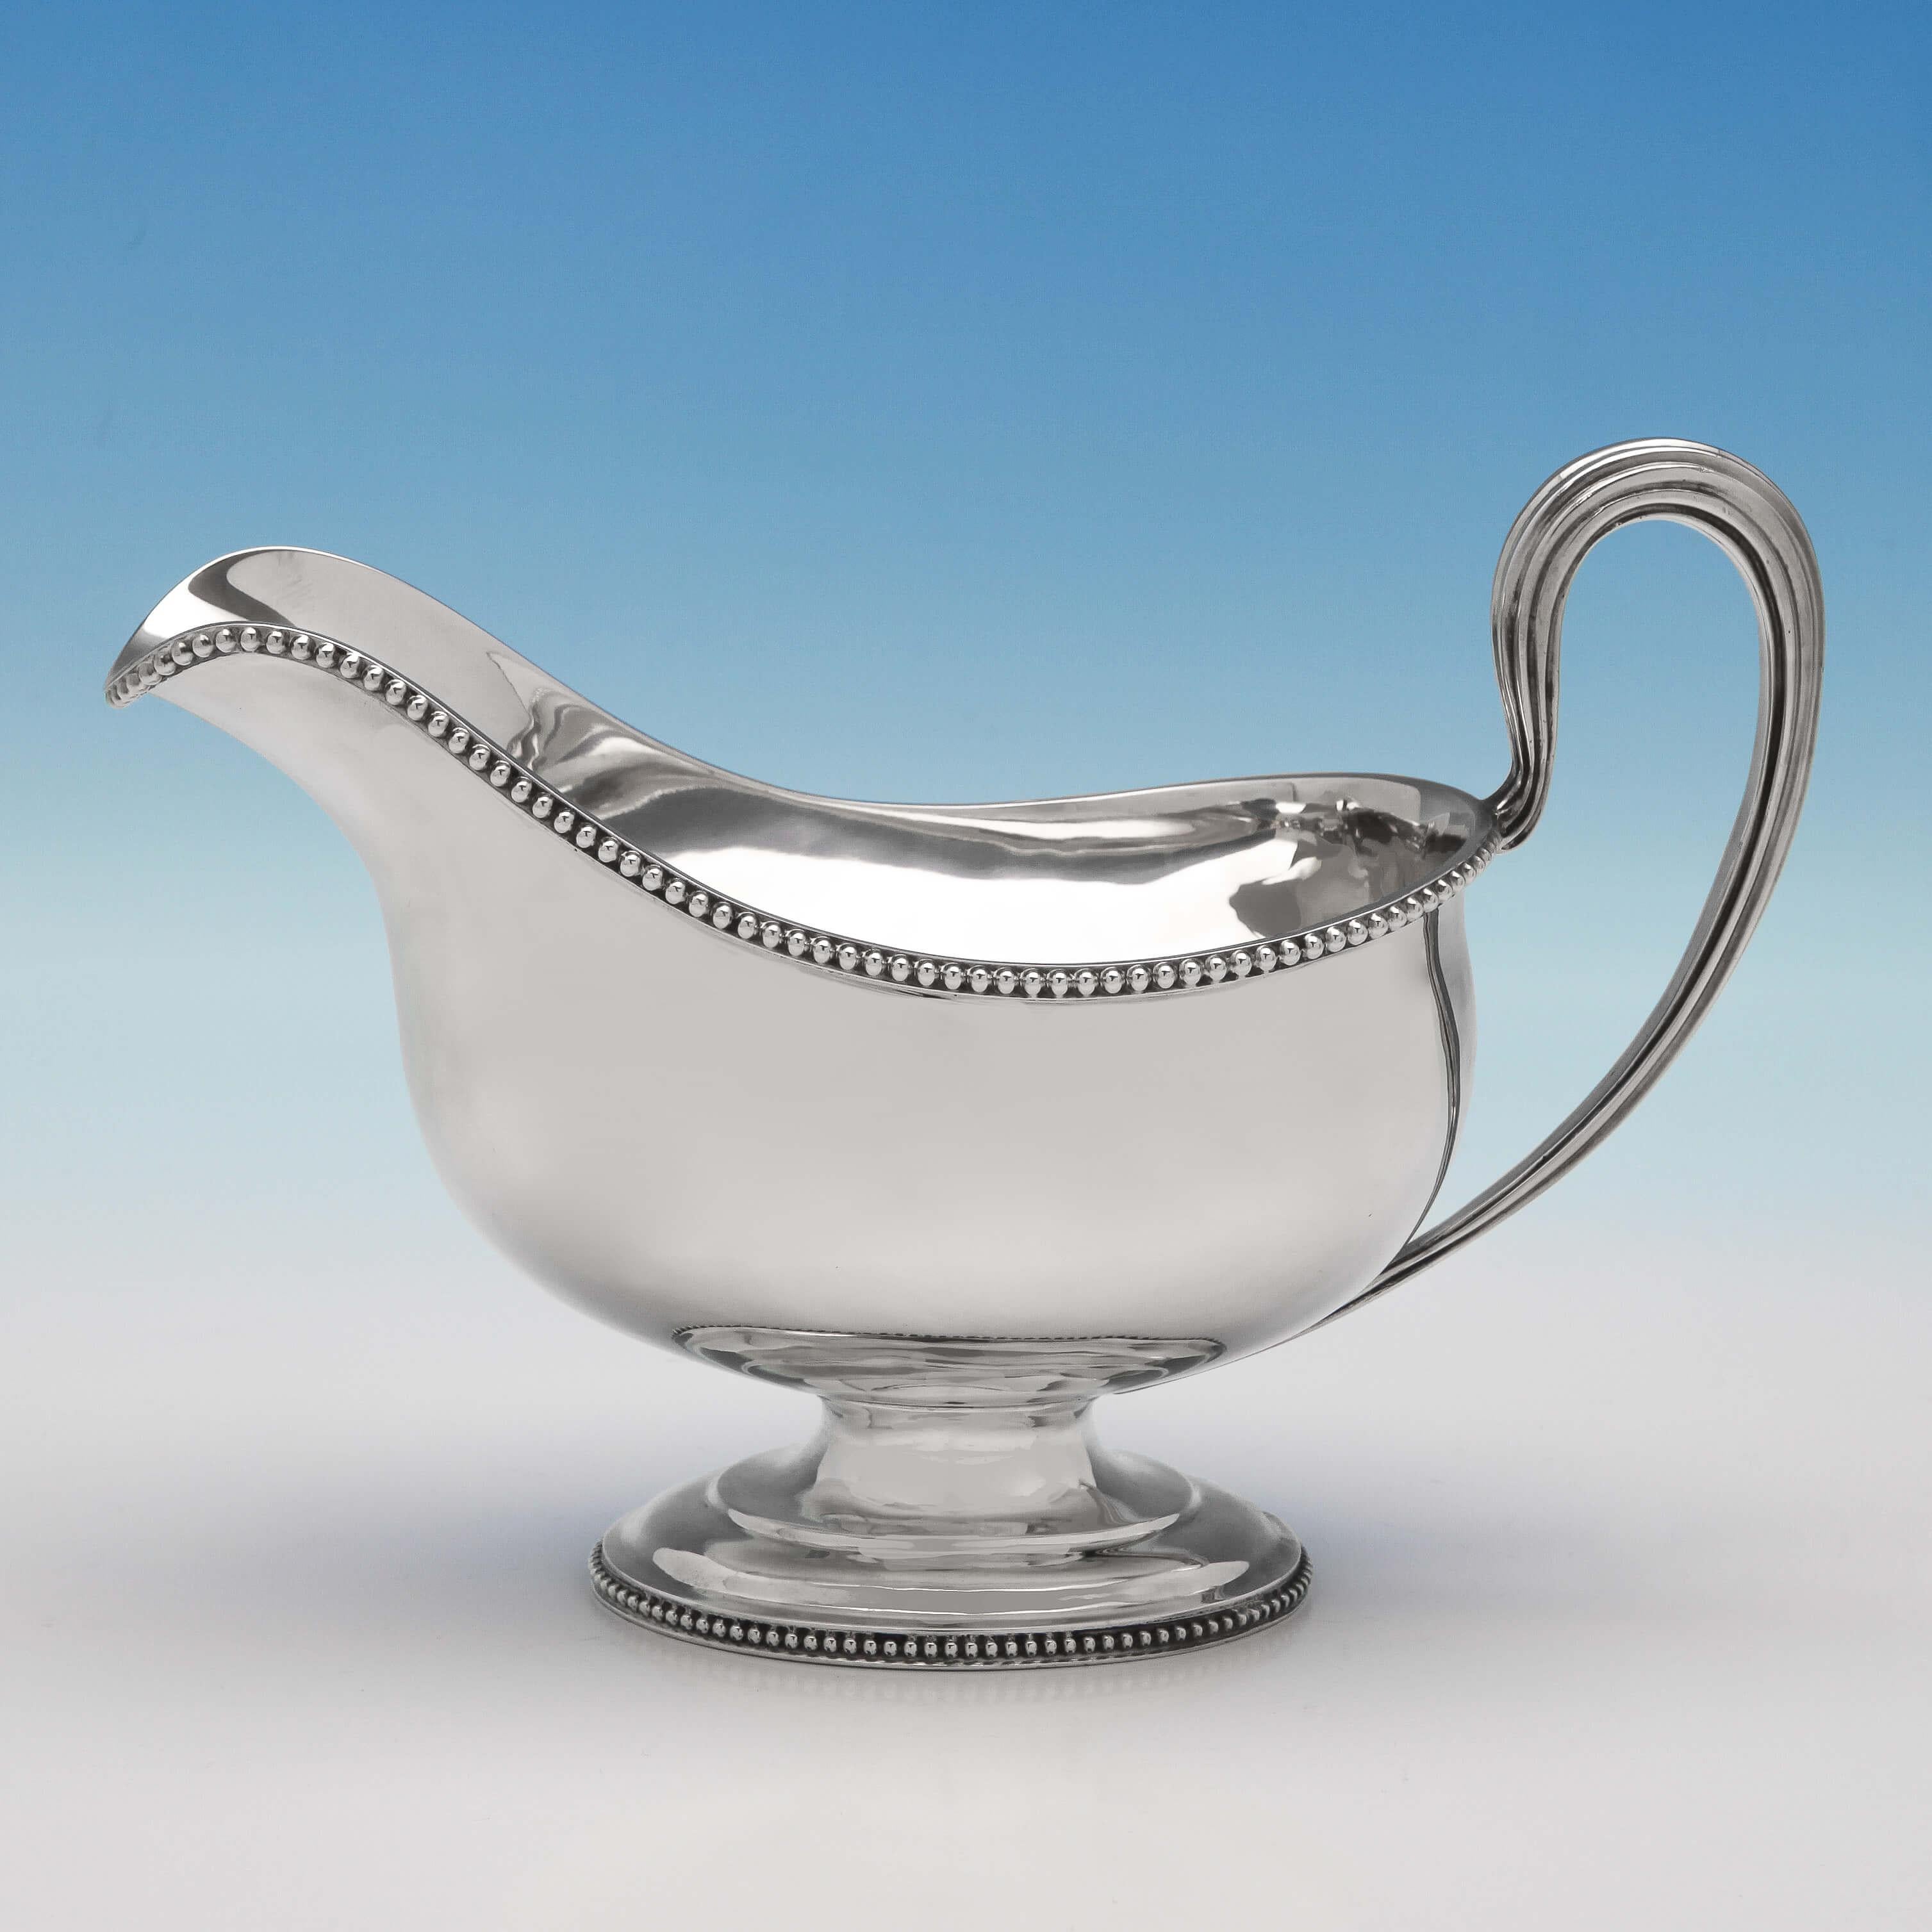 Hallmarked in London, 1910 by D. & J. Wellby, this colossal Pair of Edwardian, Antique Sterling Silver Sauce Boats have an elegant design with heavy bead borders and reed detailed loop handles. 

Each sauce boat measures an impressive 9.5